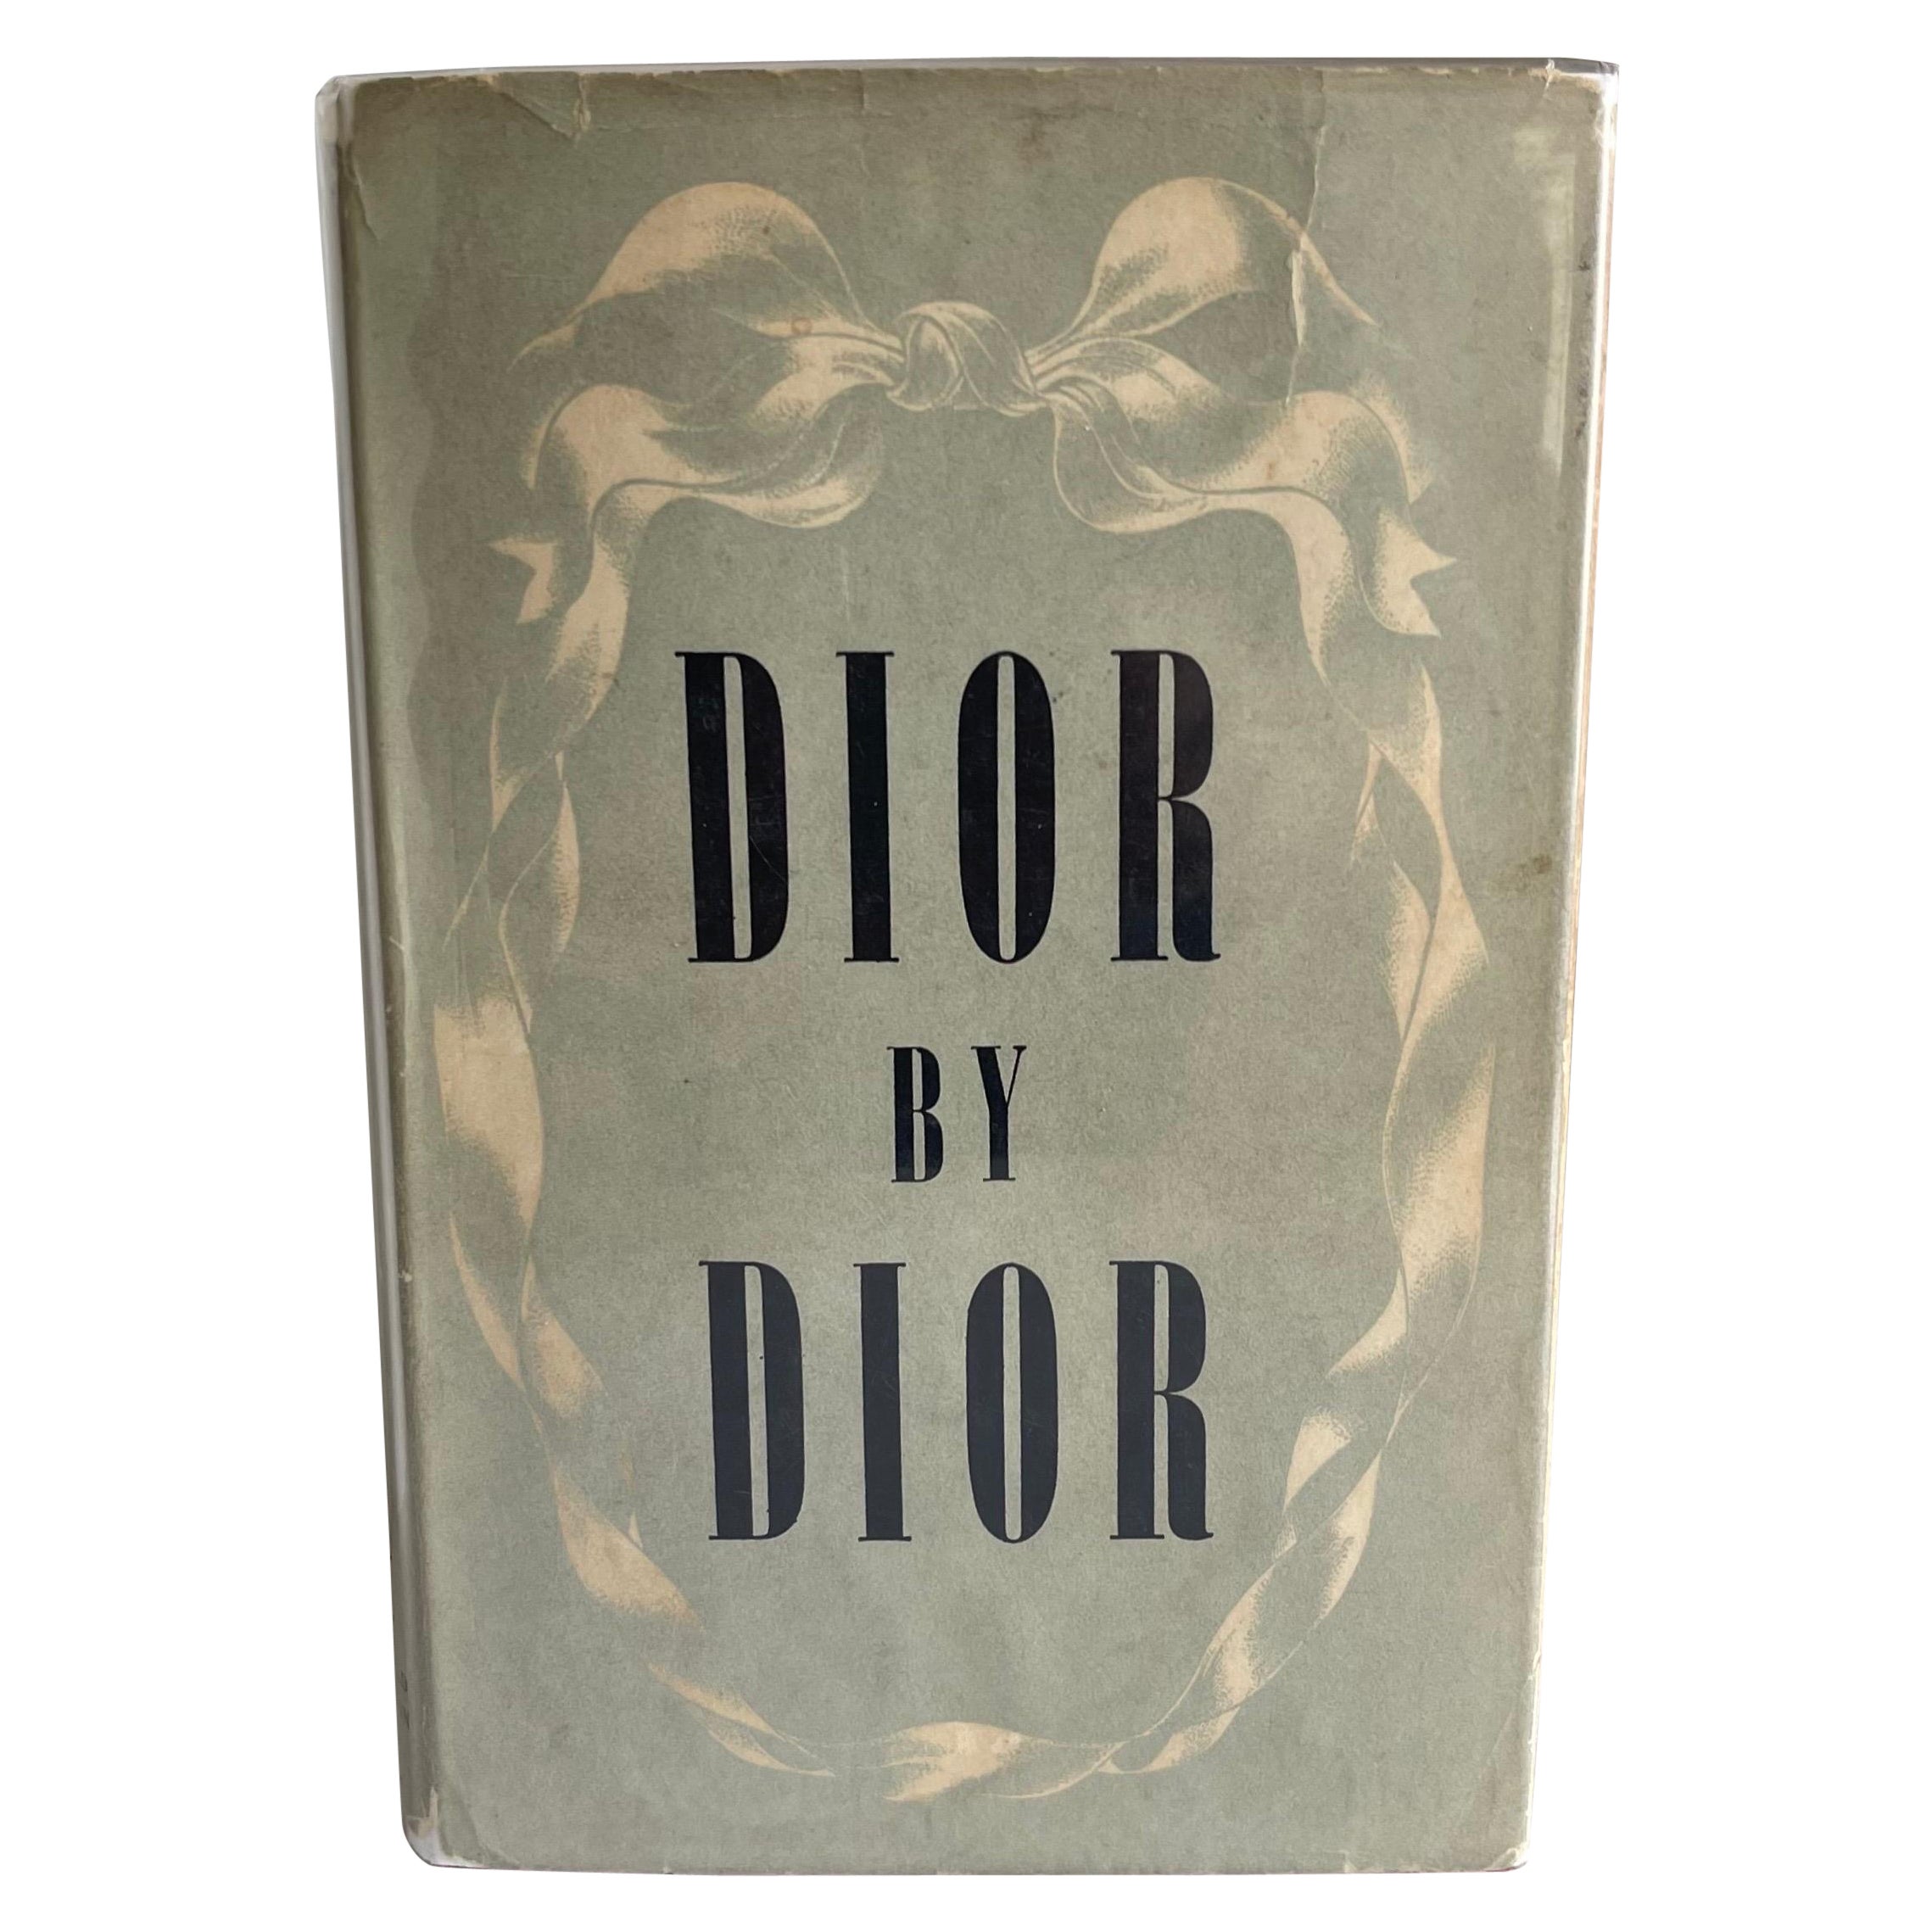 Dior by Dior the Autobiography of Christian Dior 1957 English Ed.  For Sale